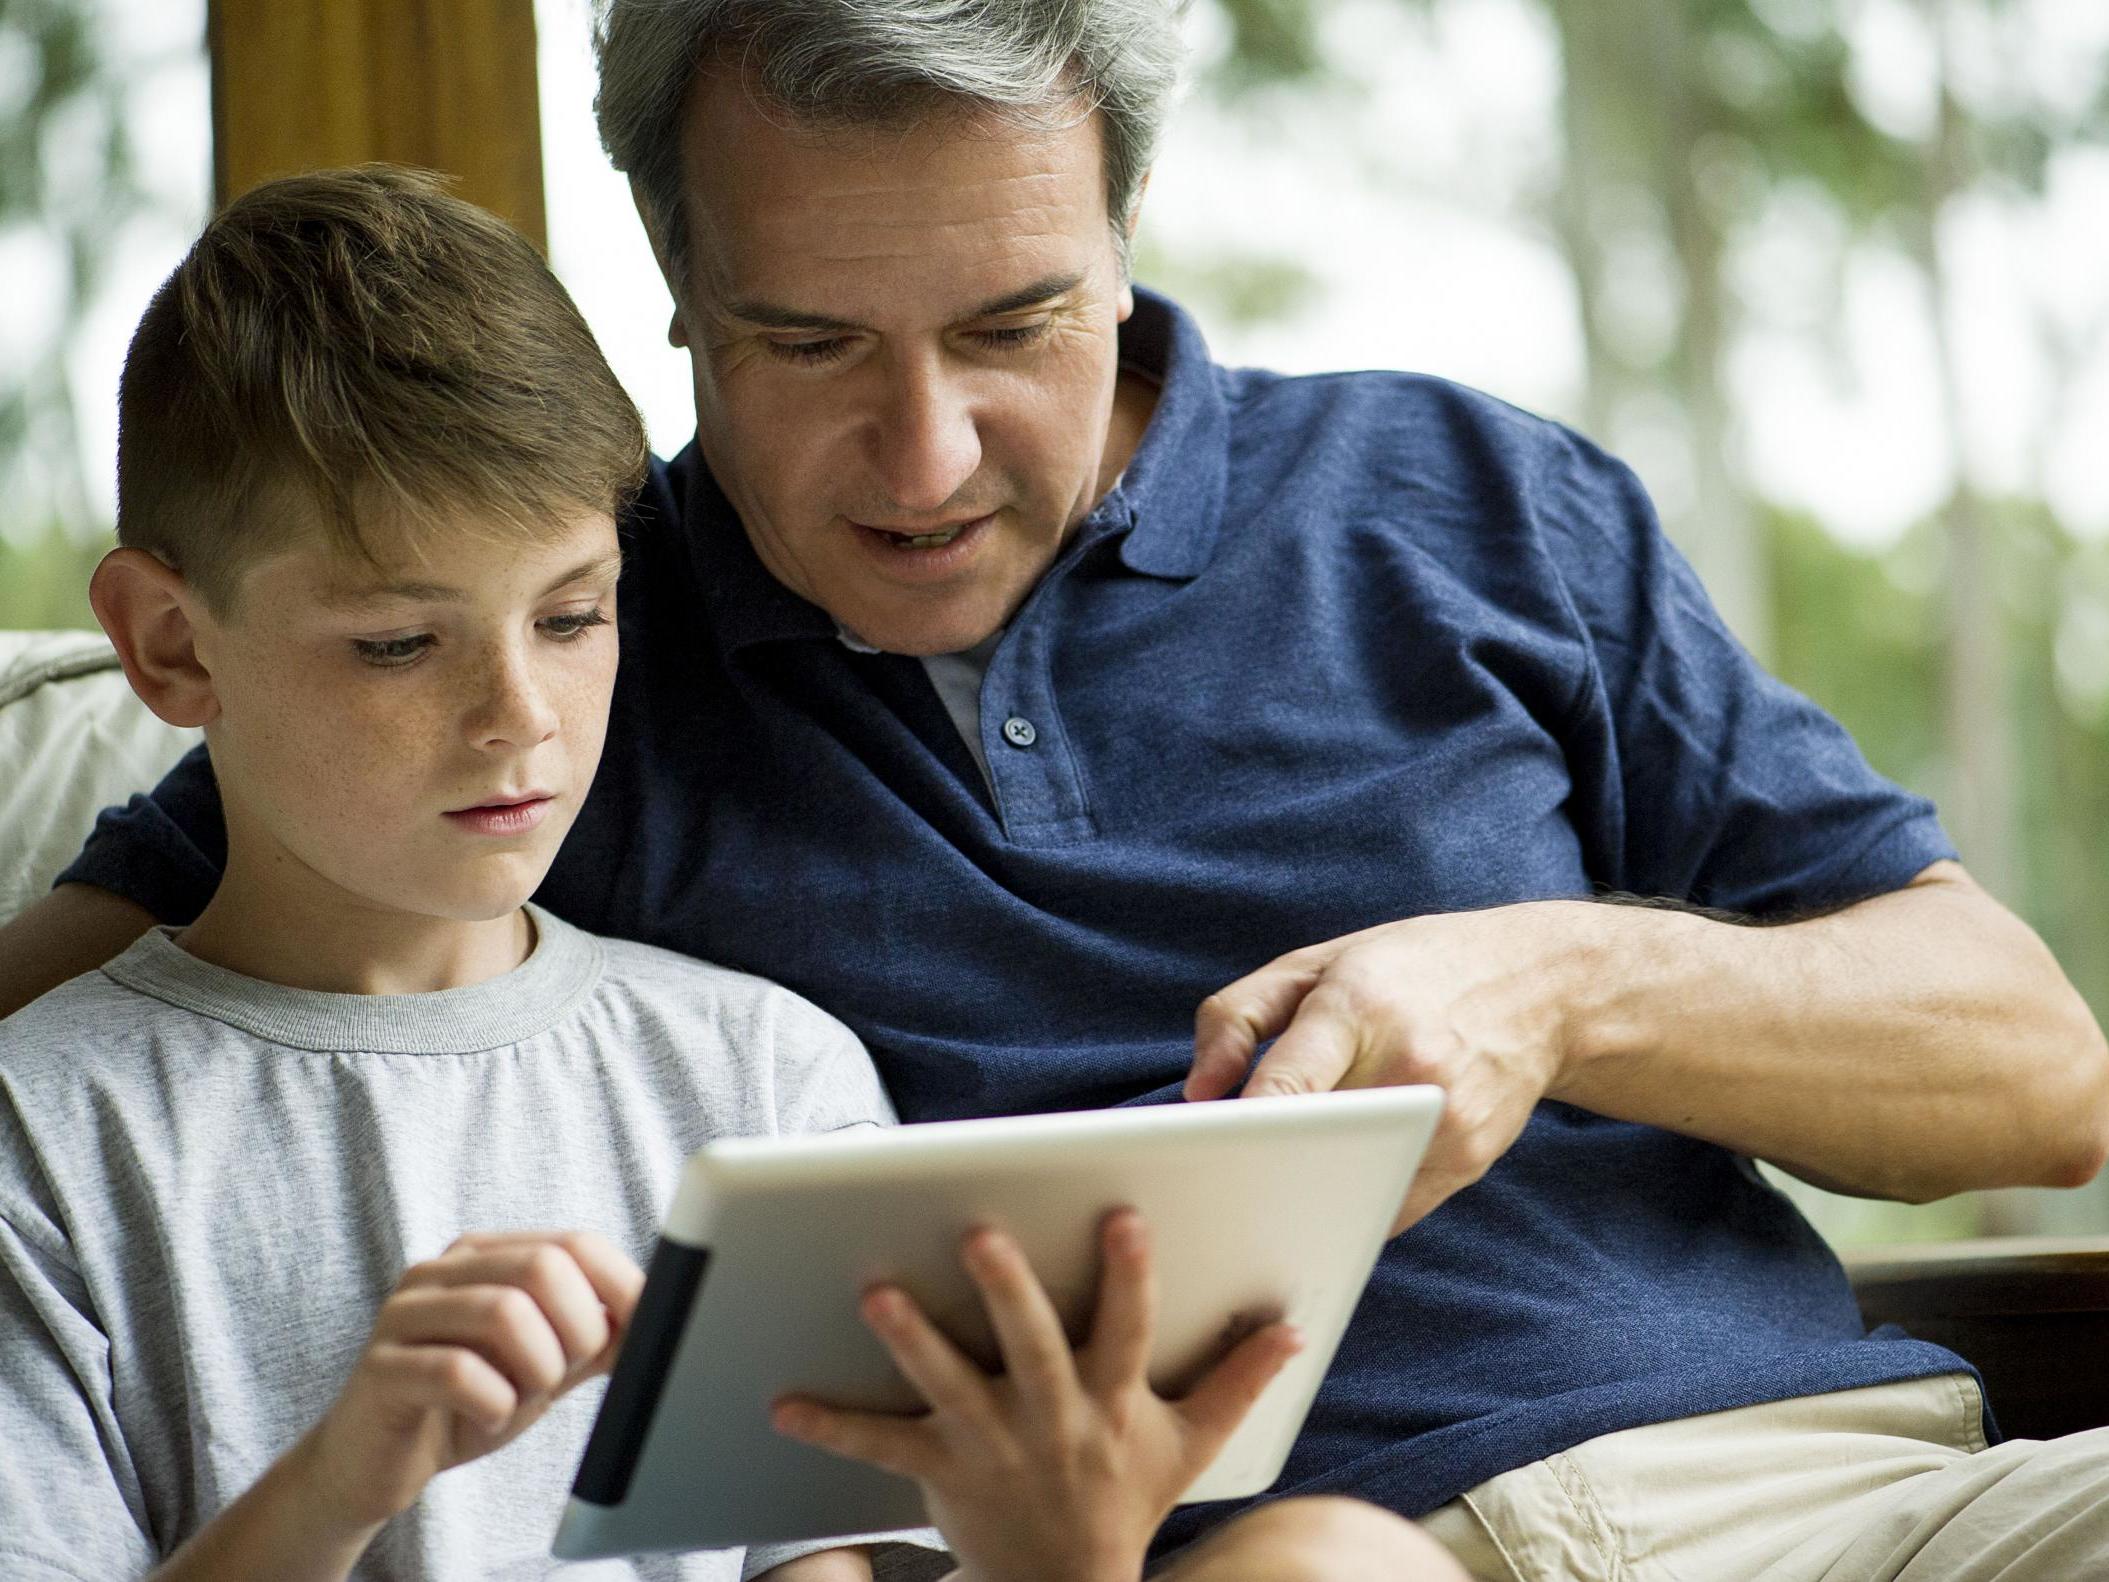 Parents are turning to Google to help their children learn new skills